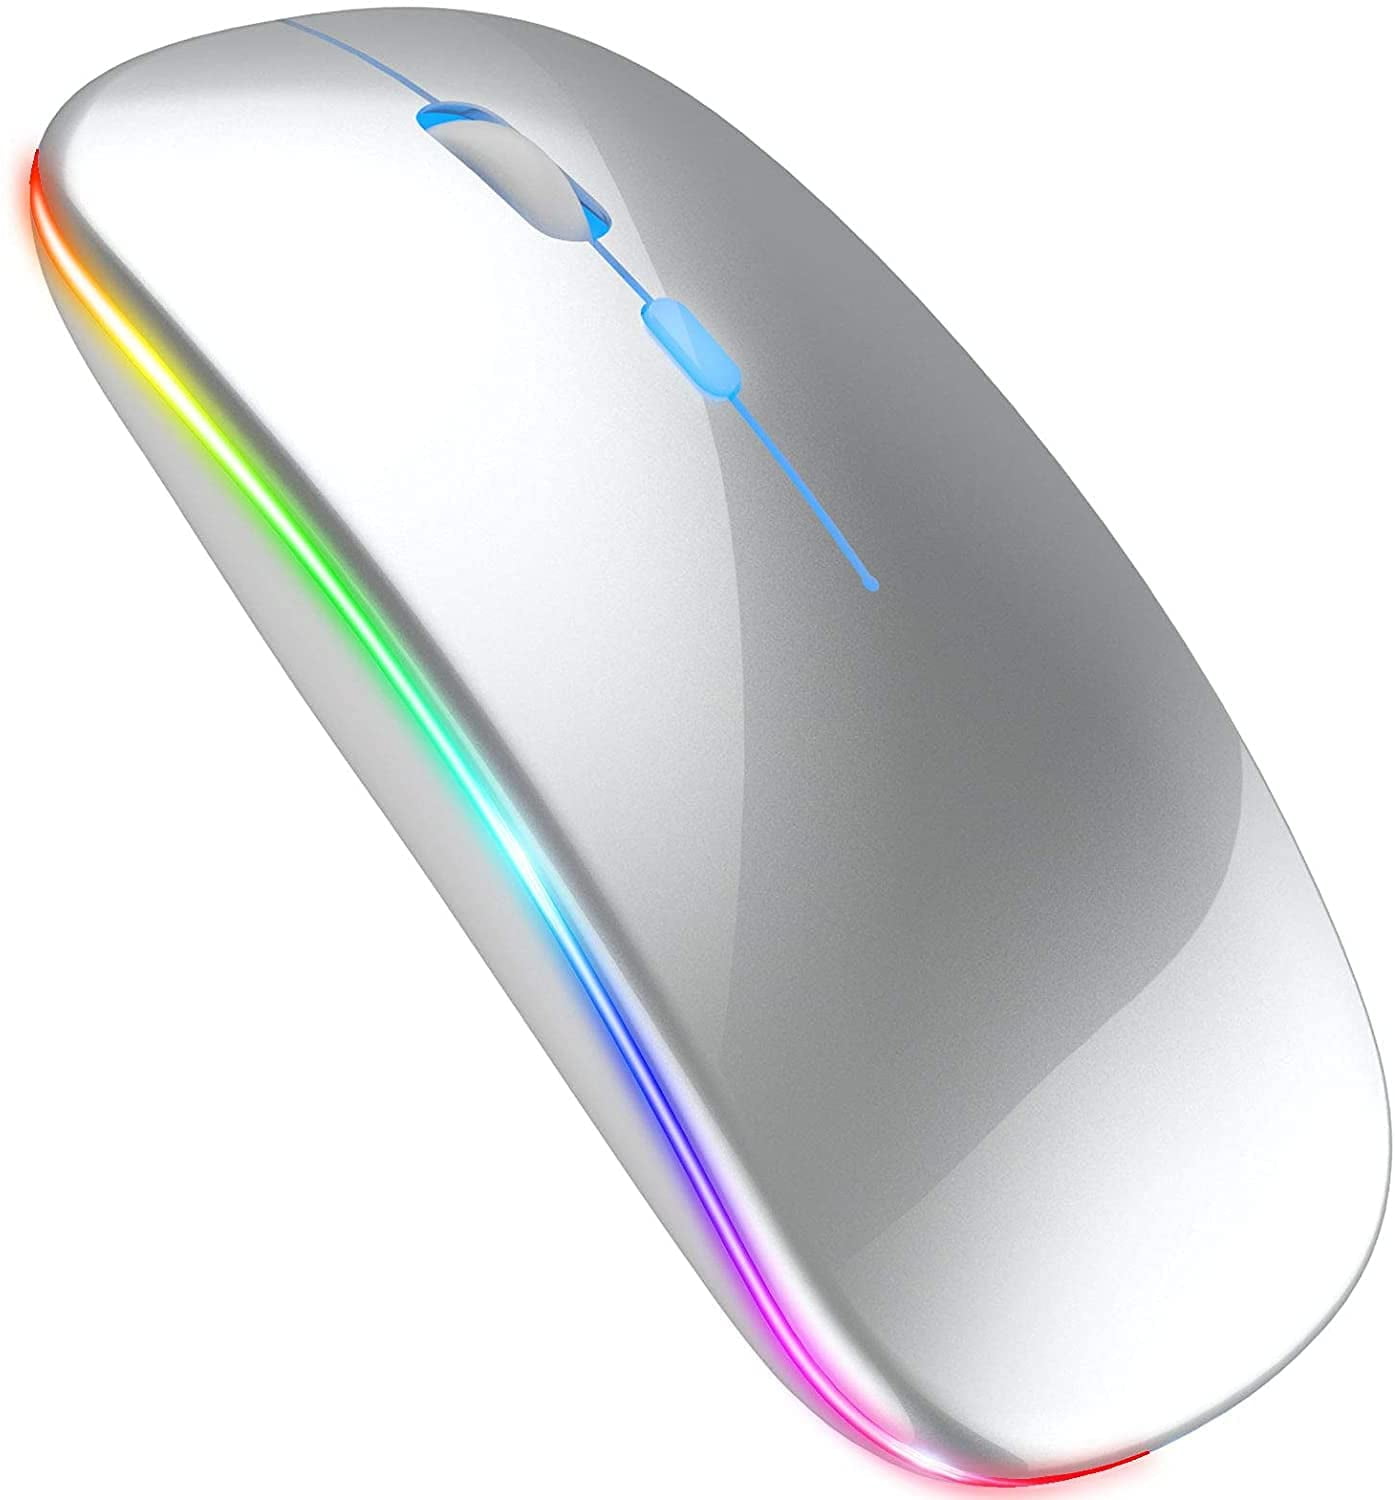 bluetooth mouse that works with mac powerbook pro